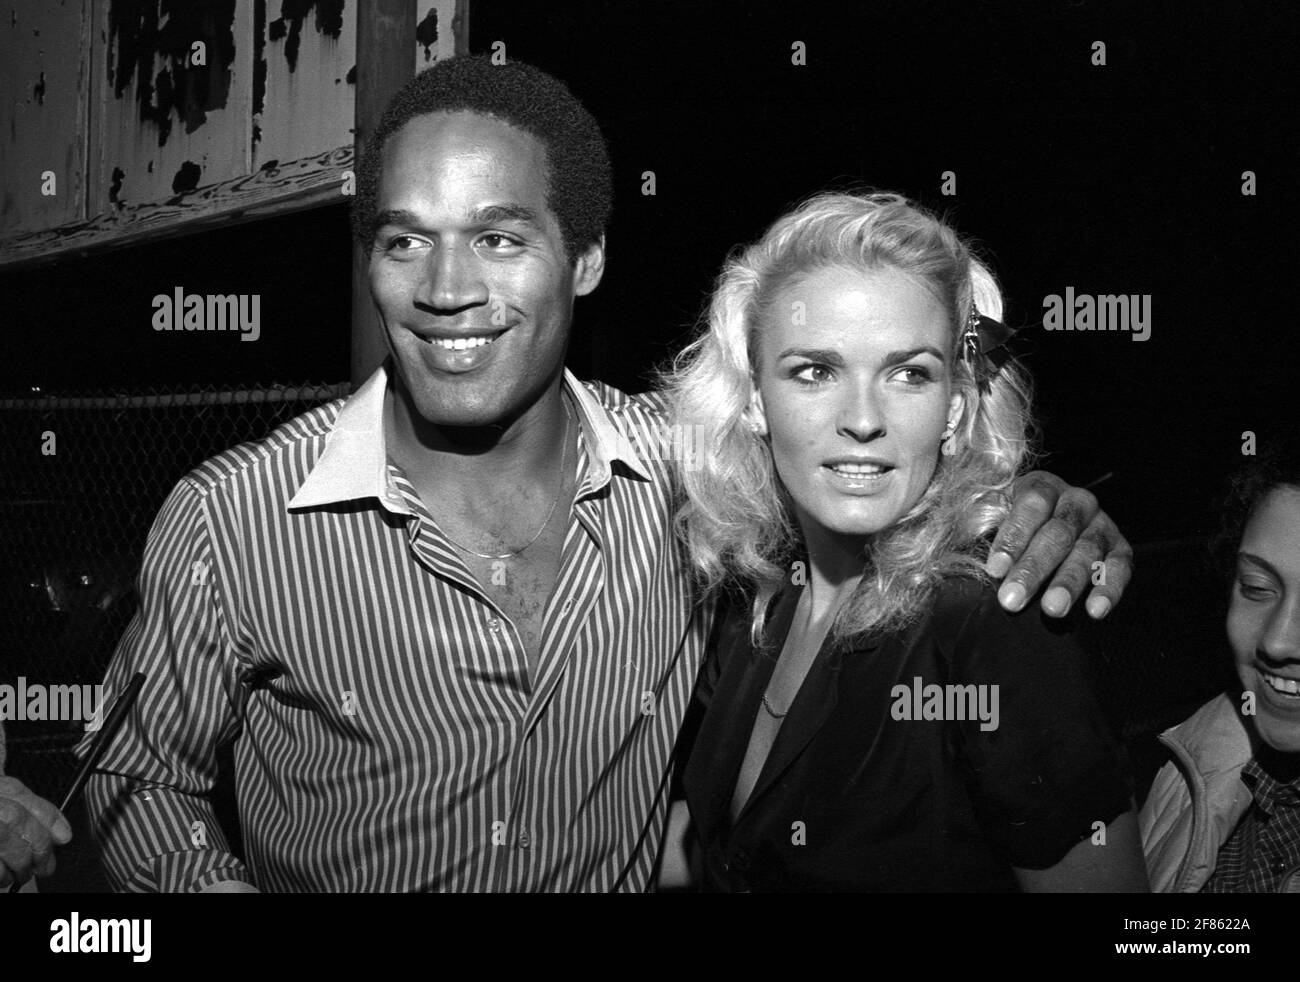 O.J. Simpson and Nicole Brown Circa 1980's Credit: Ralph Dominguez/MediaPunchDonna Summer at the American Music Awards on January 18, 1980 in Los Angeles, California Credit: Ralph Dominguez/MediaPunch Stock Photo